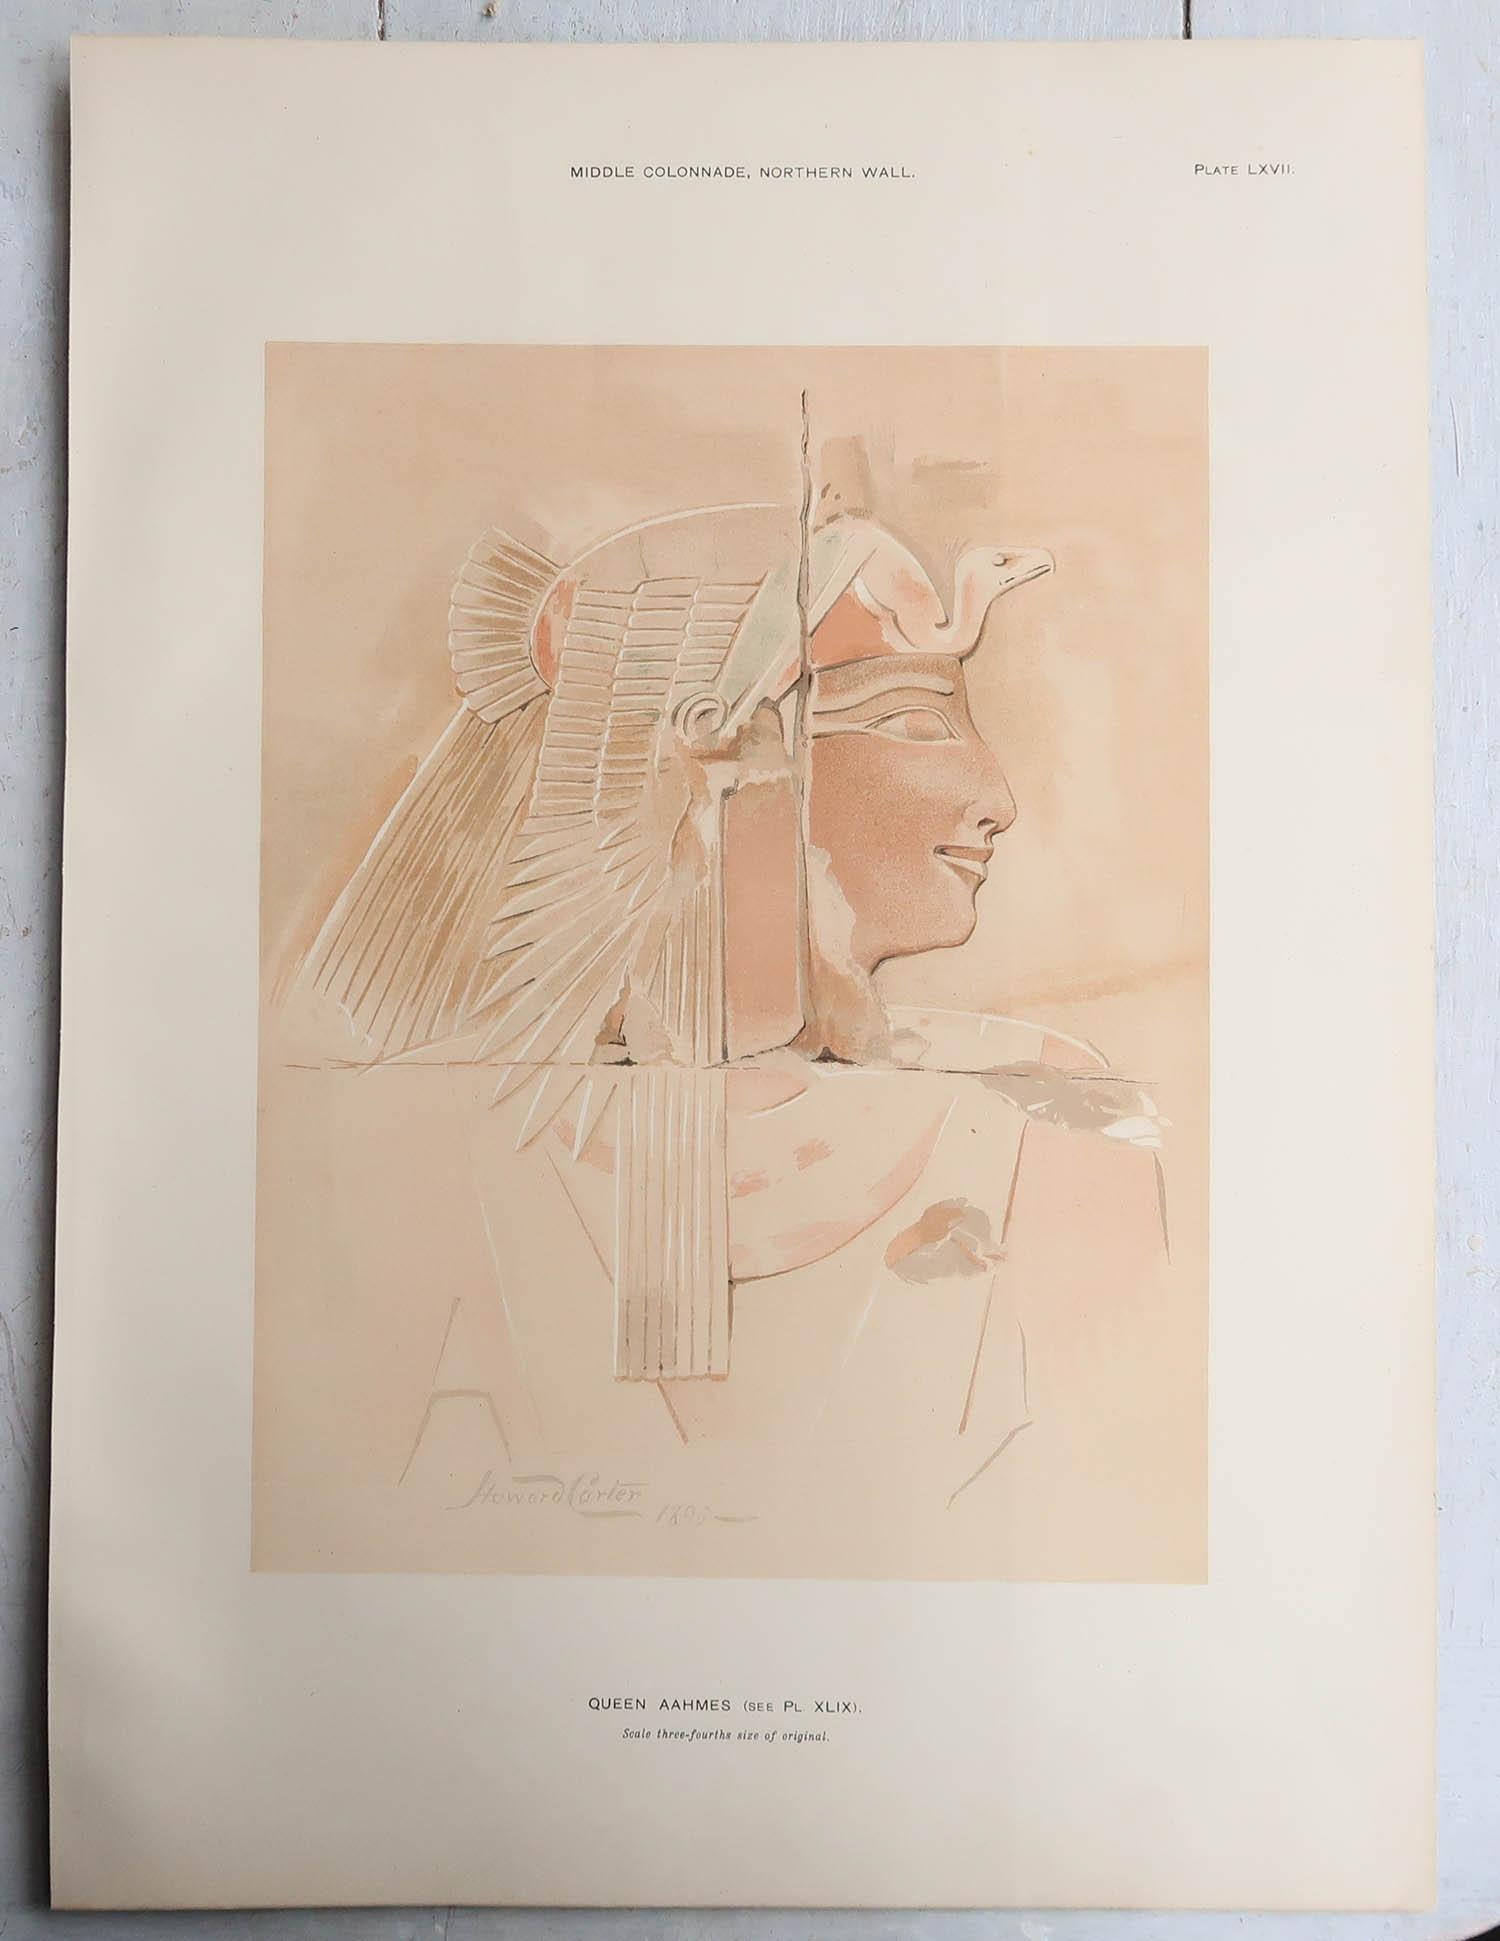 English Large Original Antique Print of an Ancient Egyptian Wall Decoration, 1896